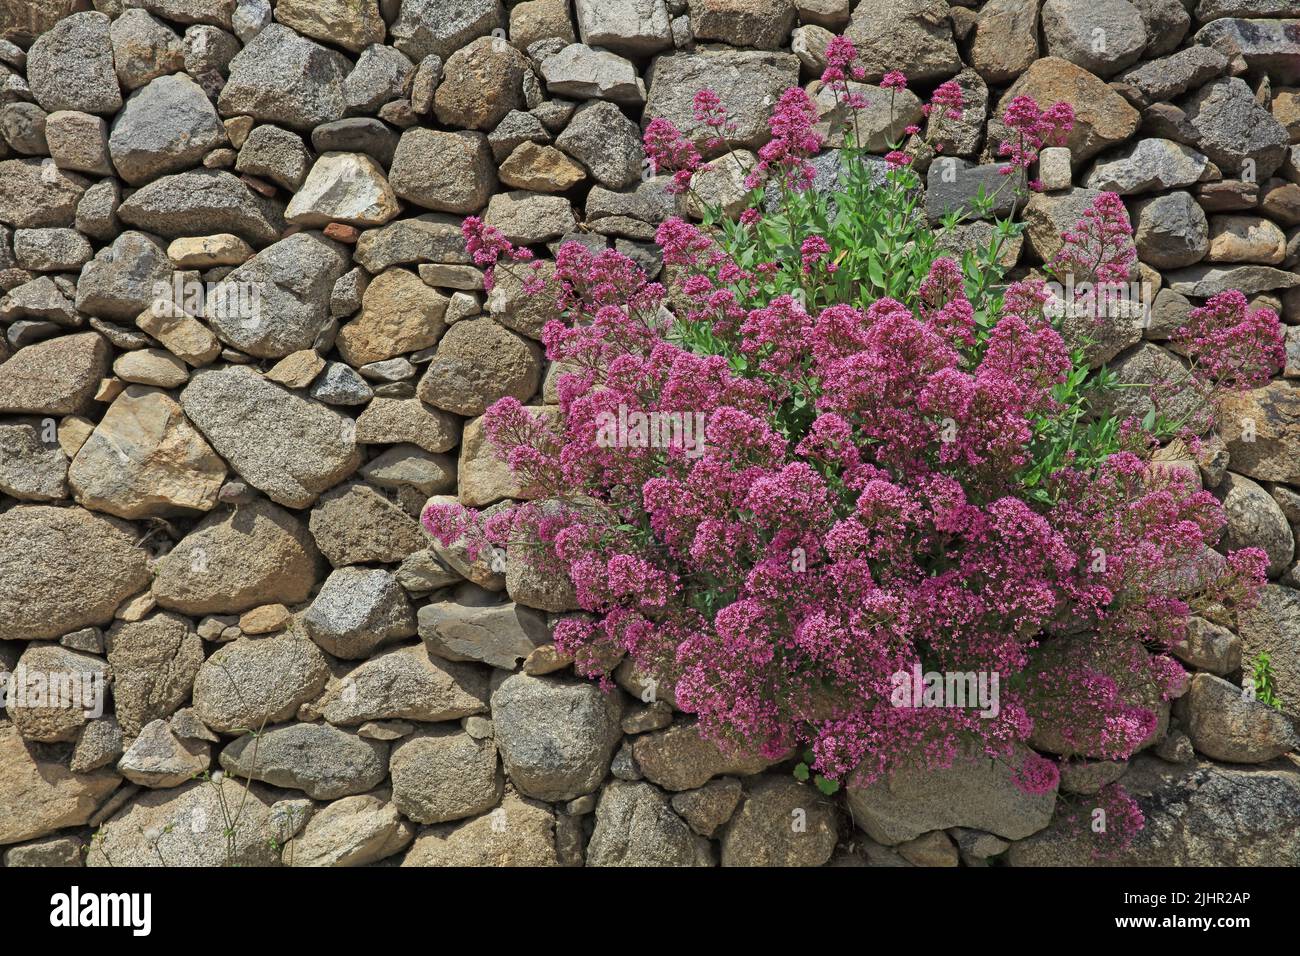 France, Valériane, massif de fleurs Valériane rouge fixée dans un mur de pierres sèches / France, Valerian, flower bed Red valerian fixed in a dry stone wall Stock Photo